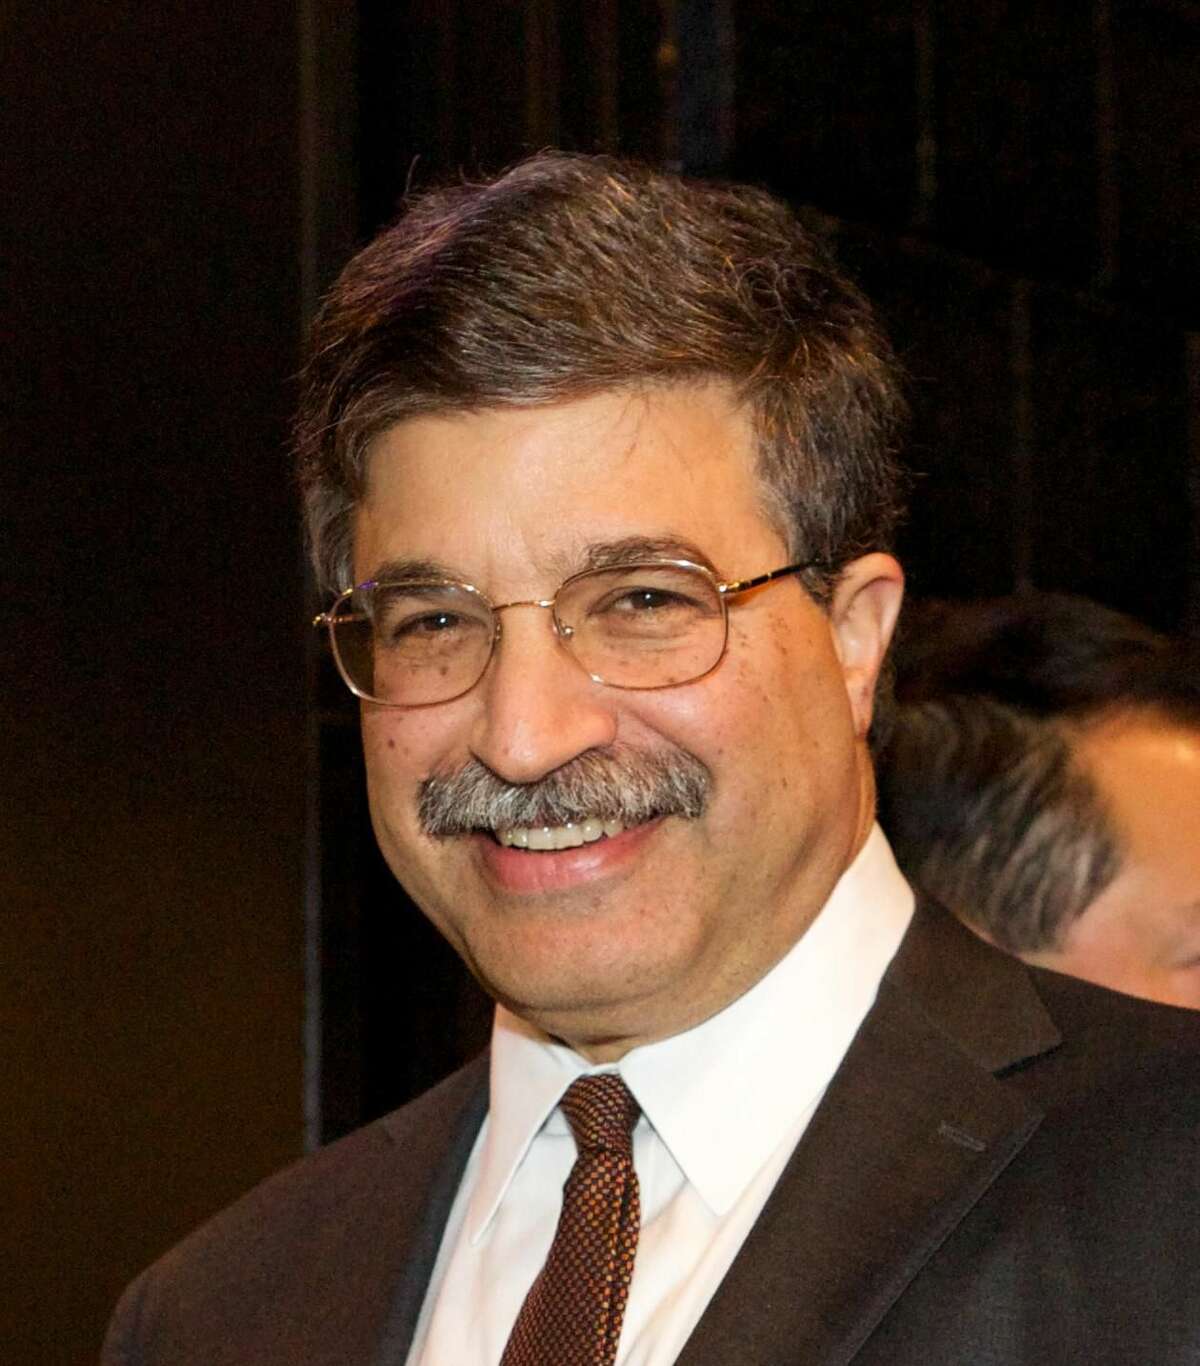 William W. Ginsberg has served as president and CEO of The Community Foundation for Greater New Haven since 2000